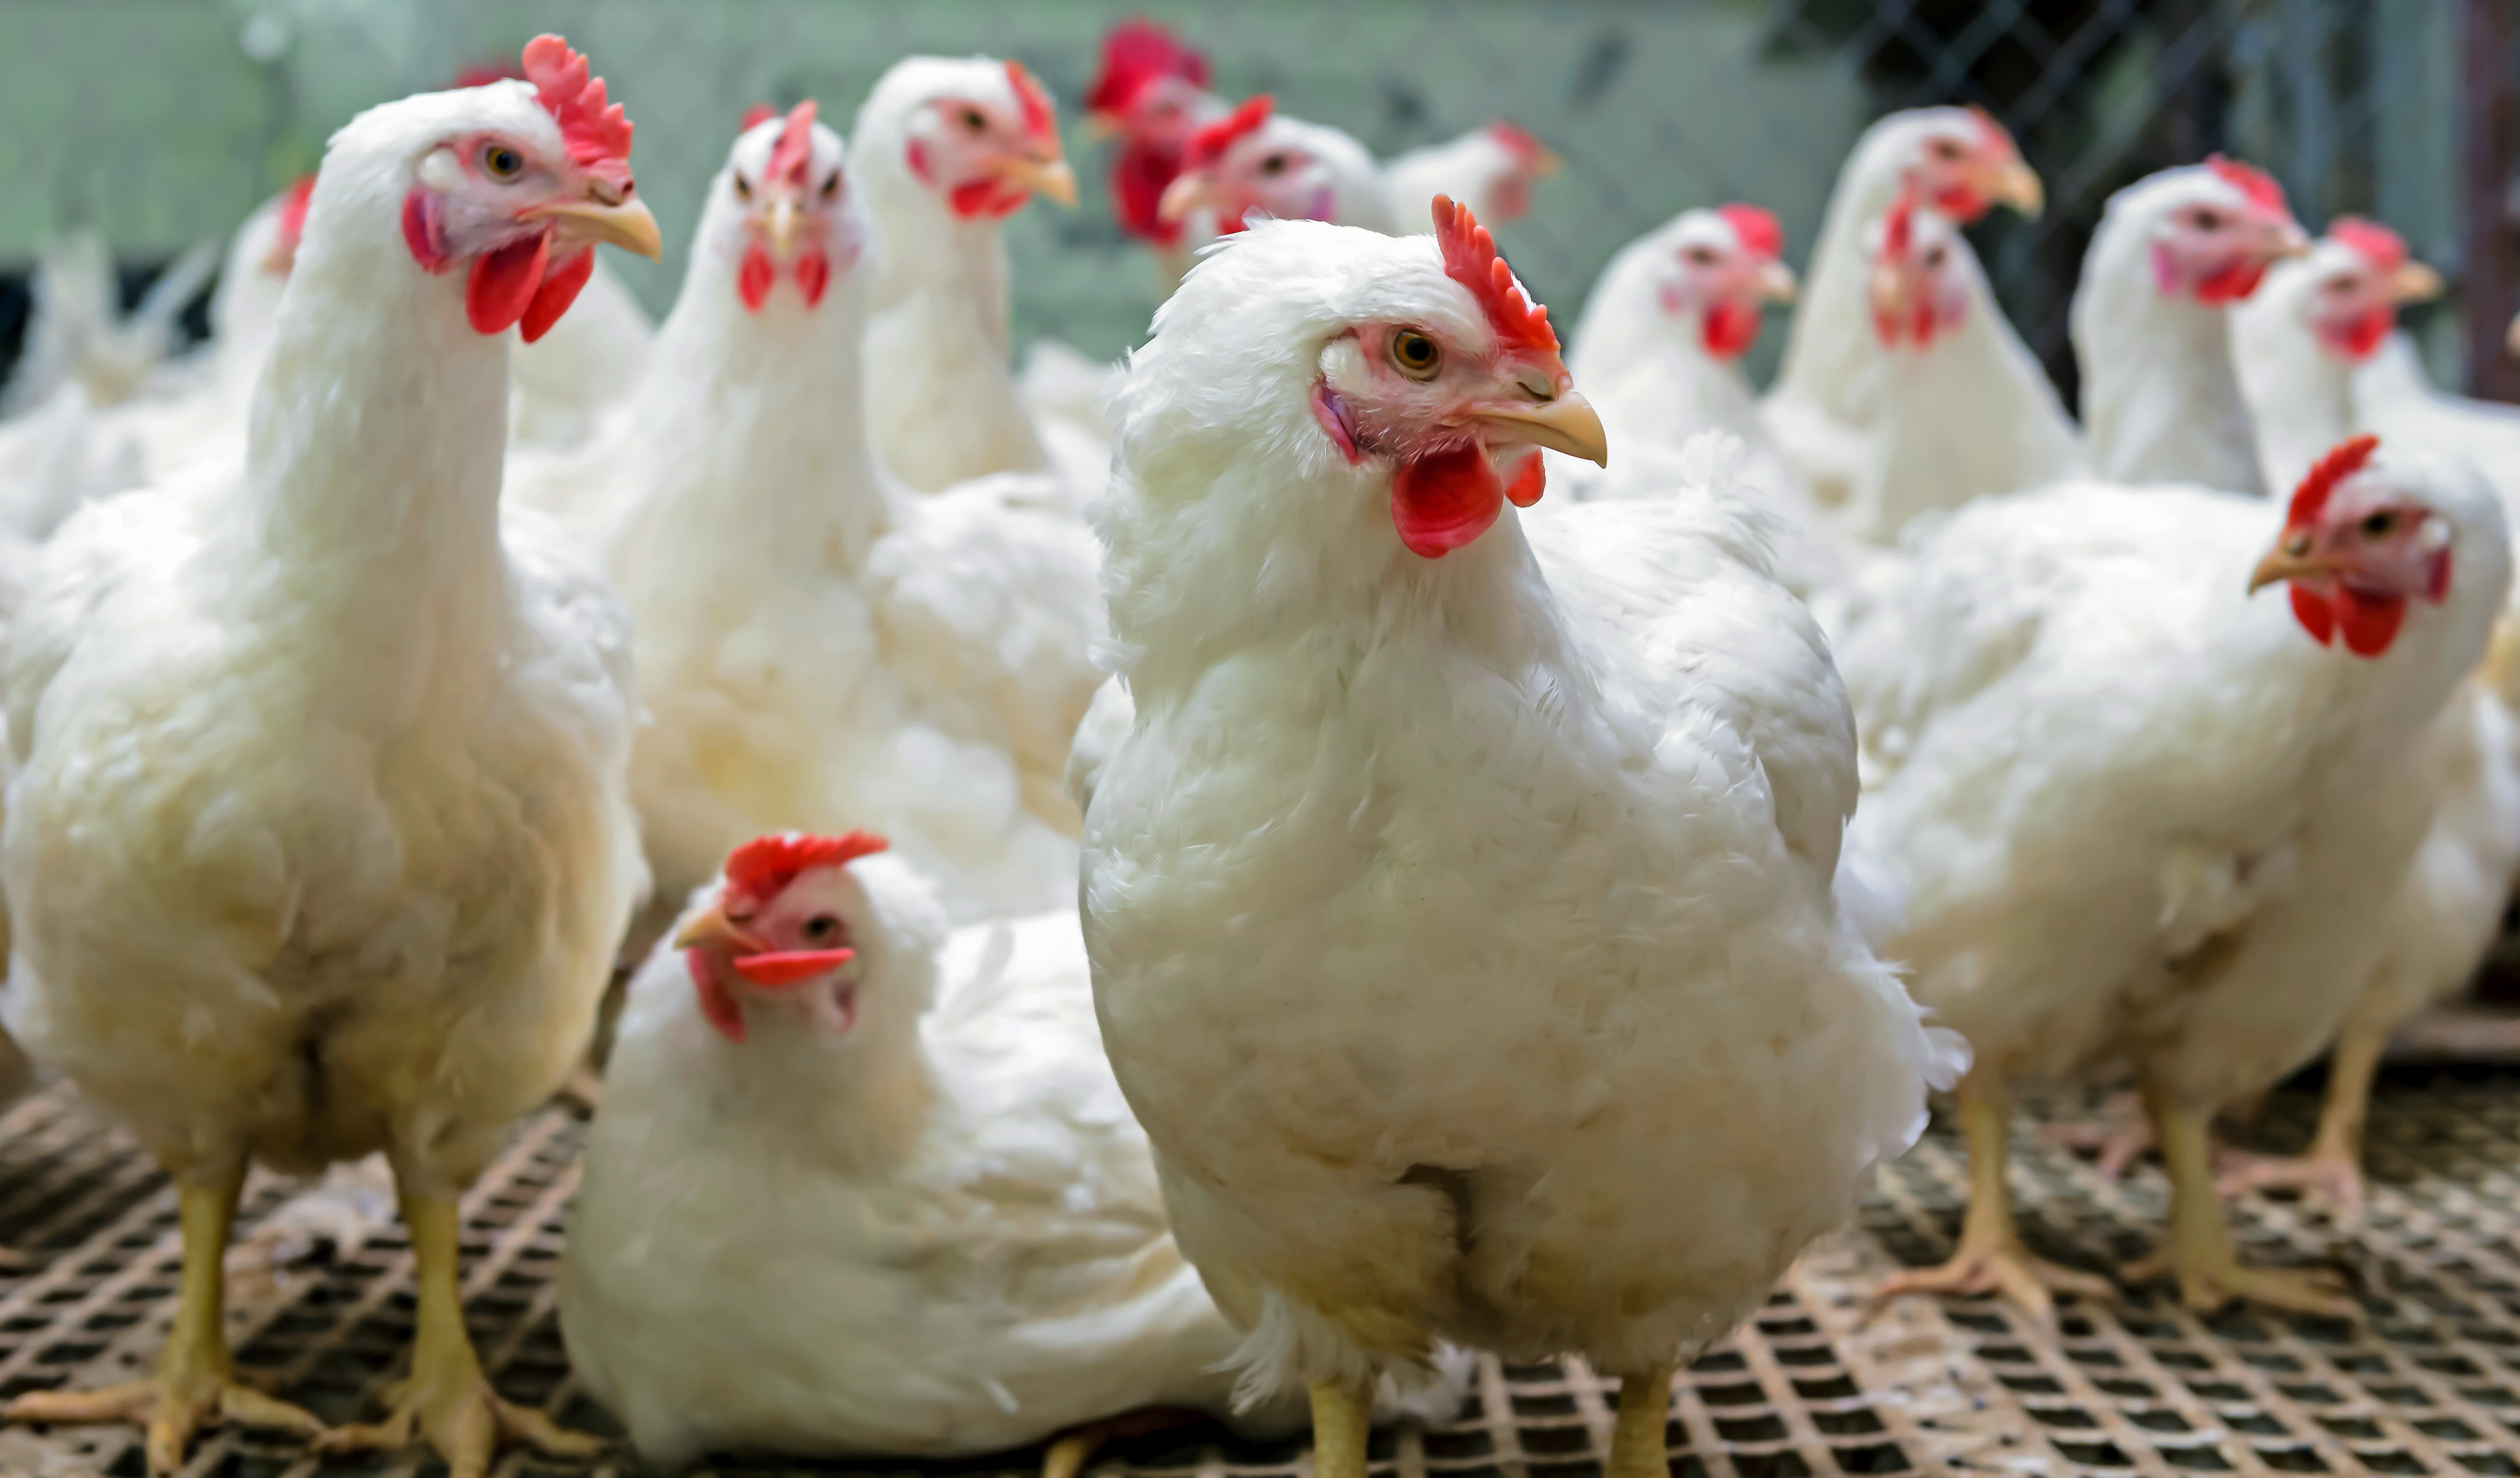 broiler chickens standing on a slatted floor